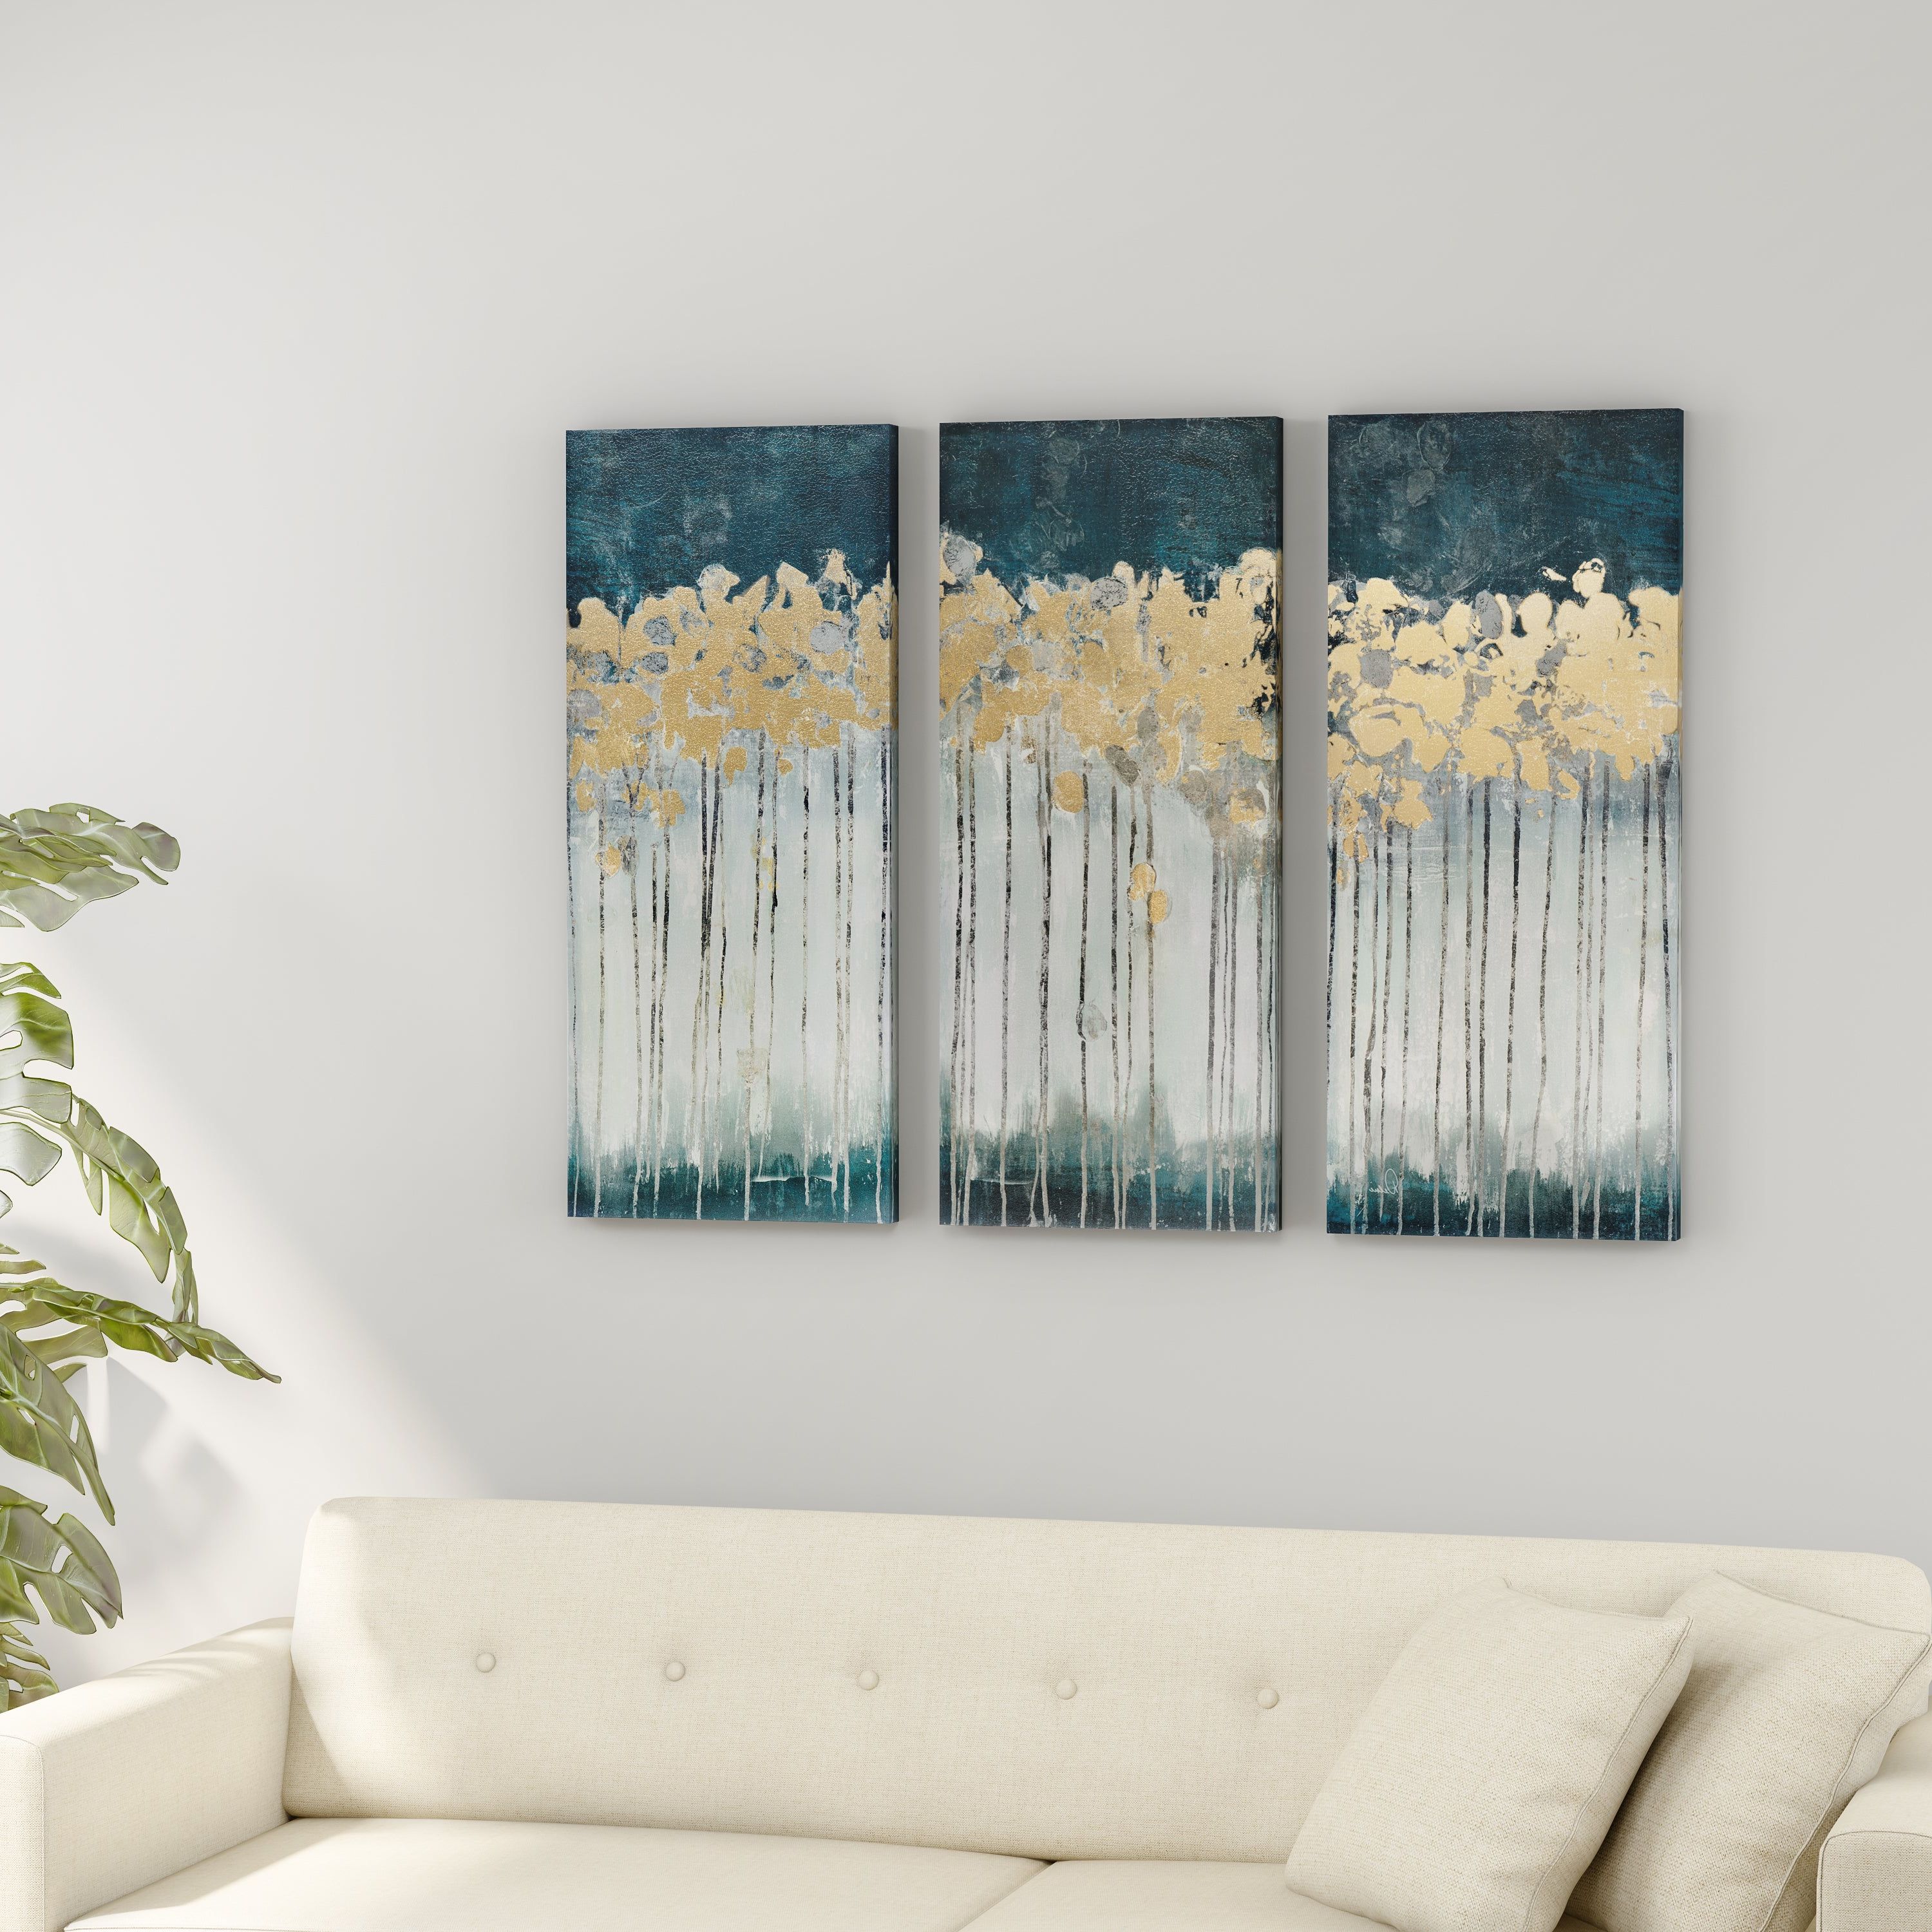 Find Great Art Gallery Deals Shopping At Overstock Within 4 Piece Metal Wall Decor Sets (View 8 of 20)